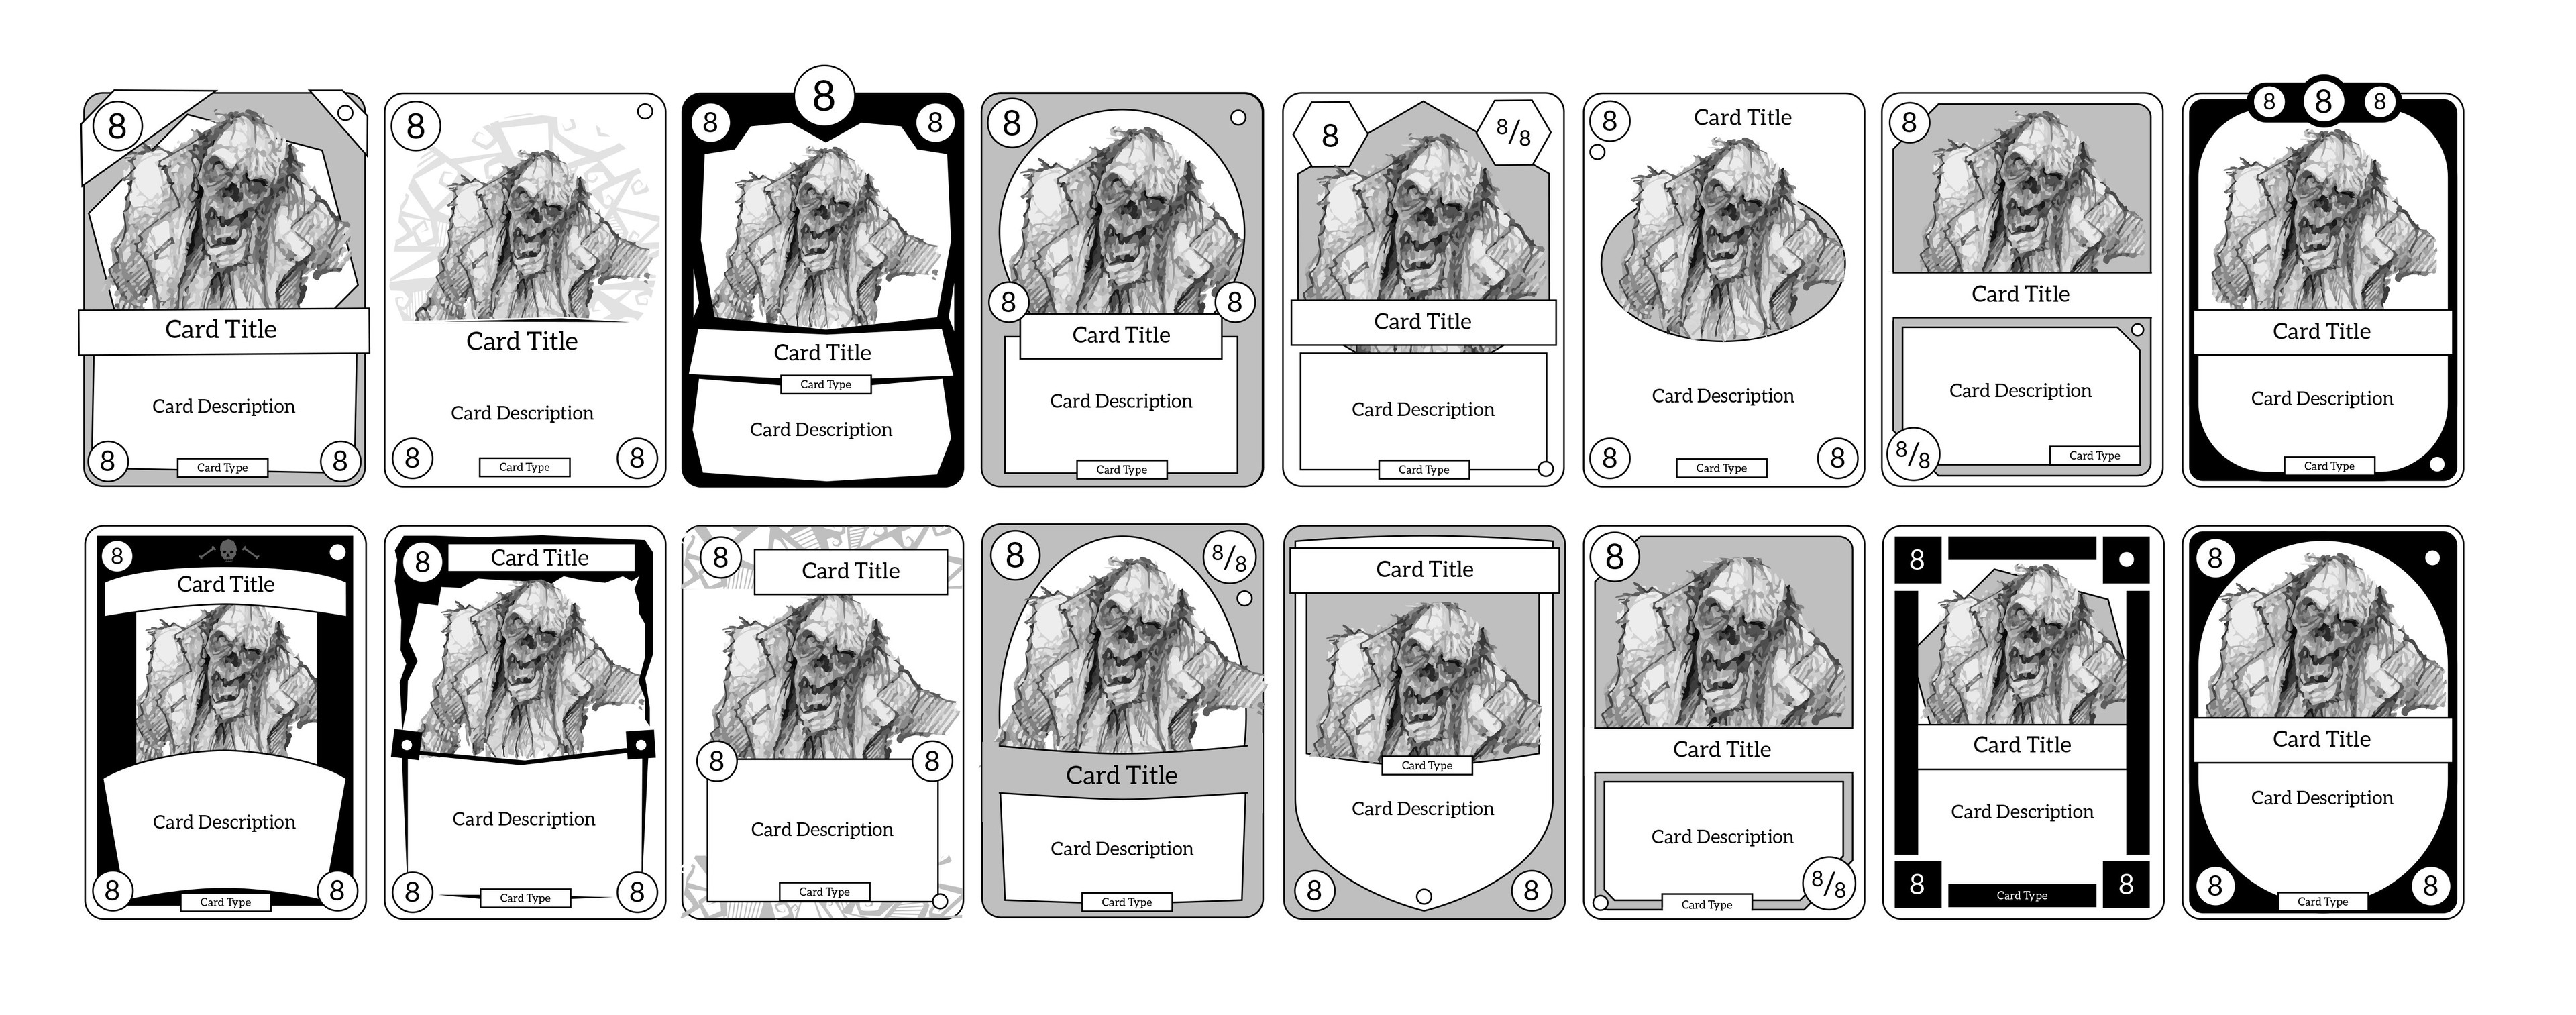 The more successful wireframes were picked out and I started doing some rough concepts for how the card image and text could be framed.  I kept this stage as quick shapes to allow fast iteration and discussions with the team.